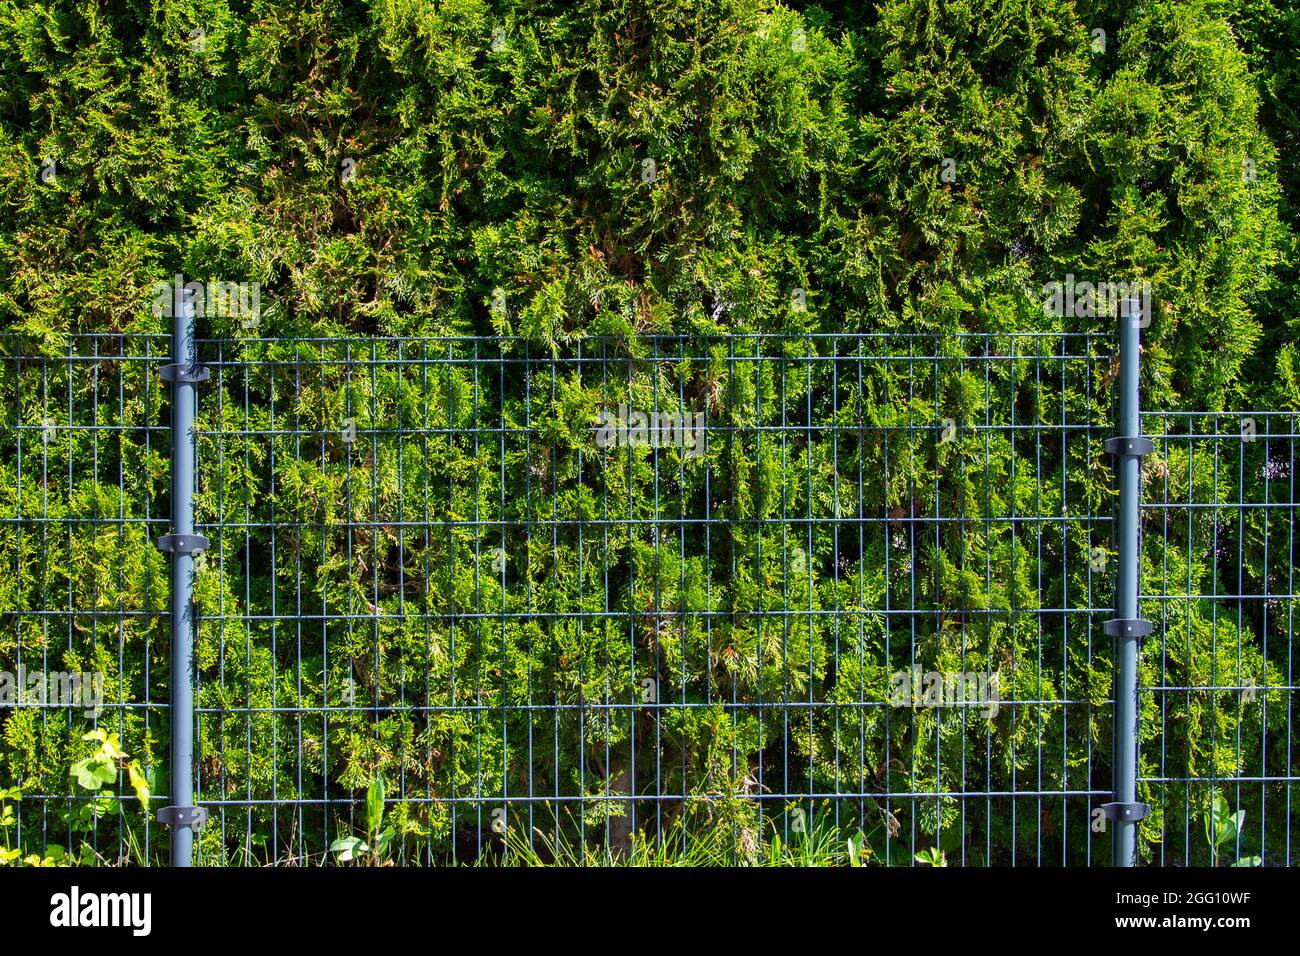 Green thuja hedge behind a metal fence Stock Photo